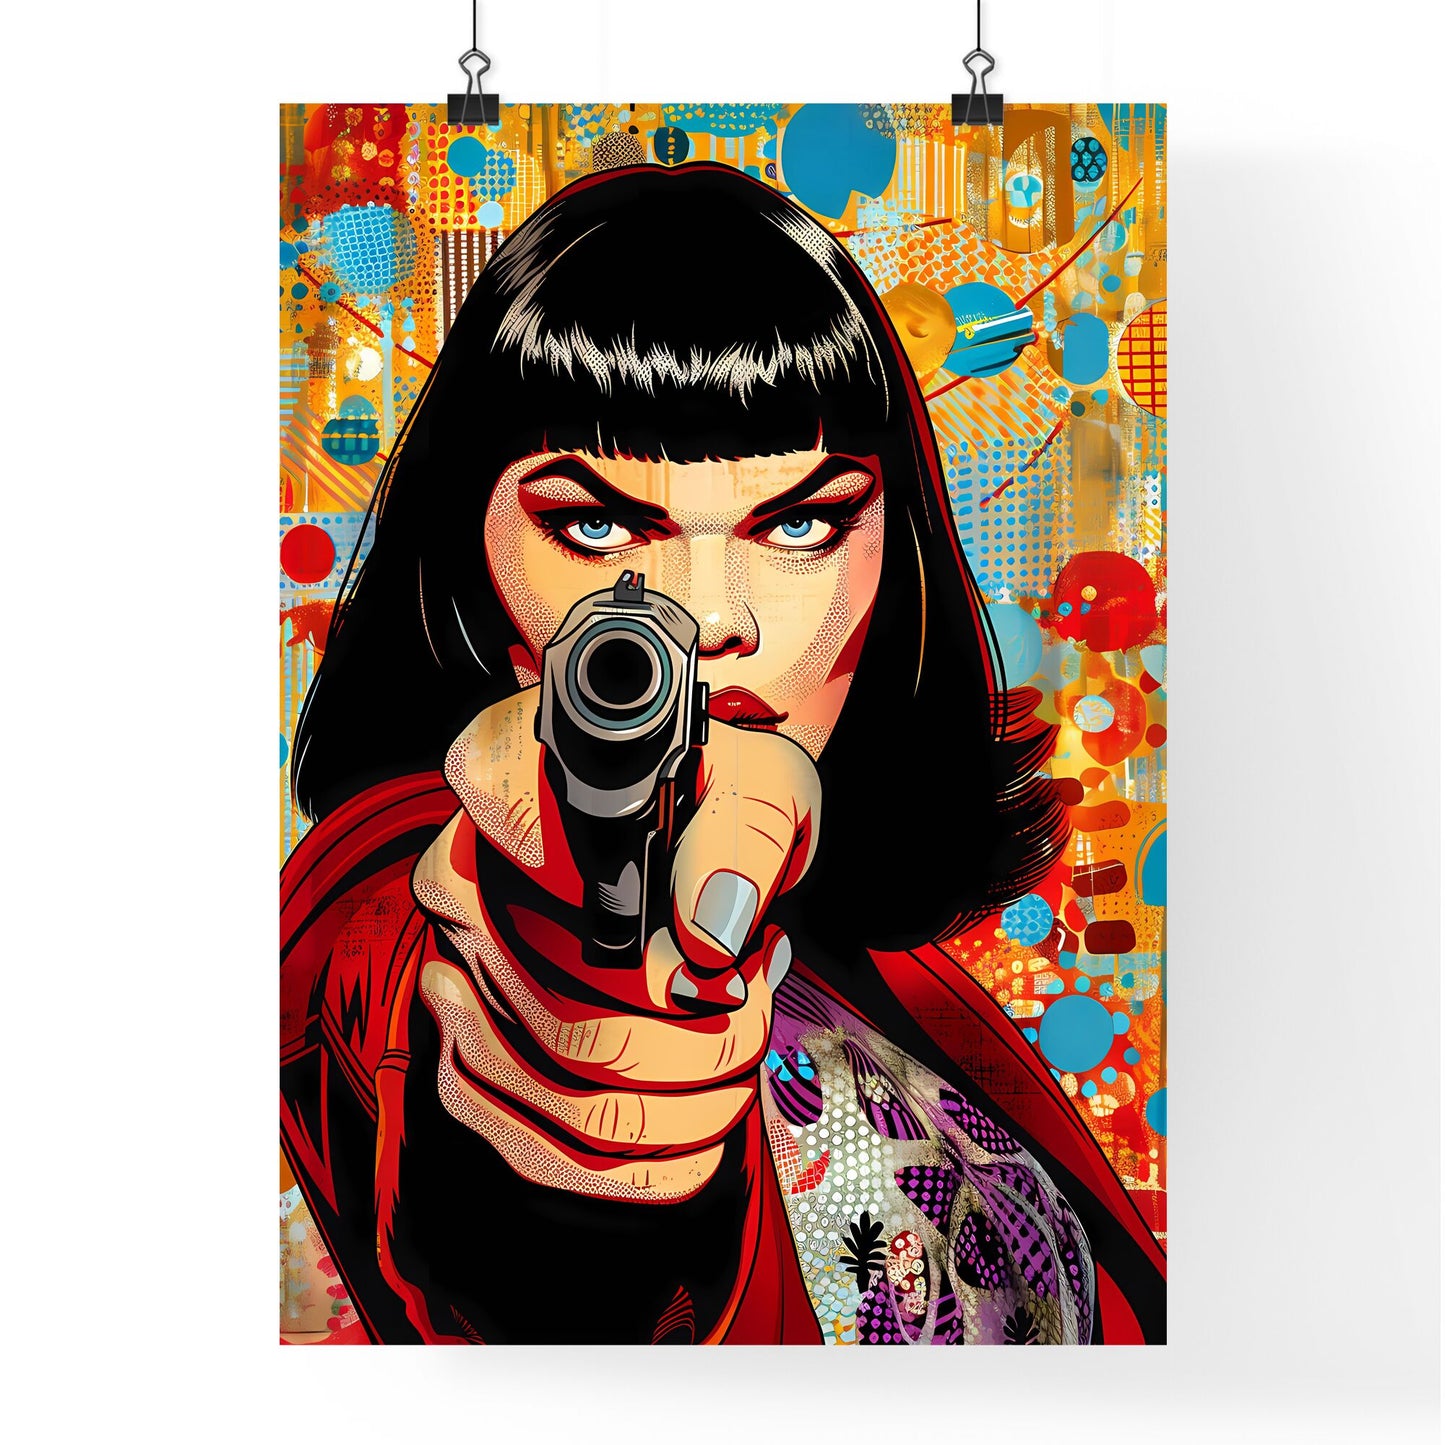 Vibrant Pop Art Woman with Gun: Hard Edge Painting Inspired by Adi Granov, Poster Art with Visibly Enlarged Print Screen Dots Default Title